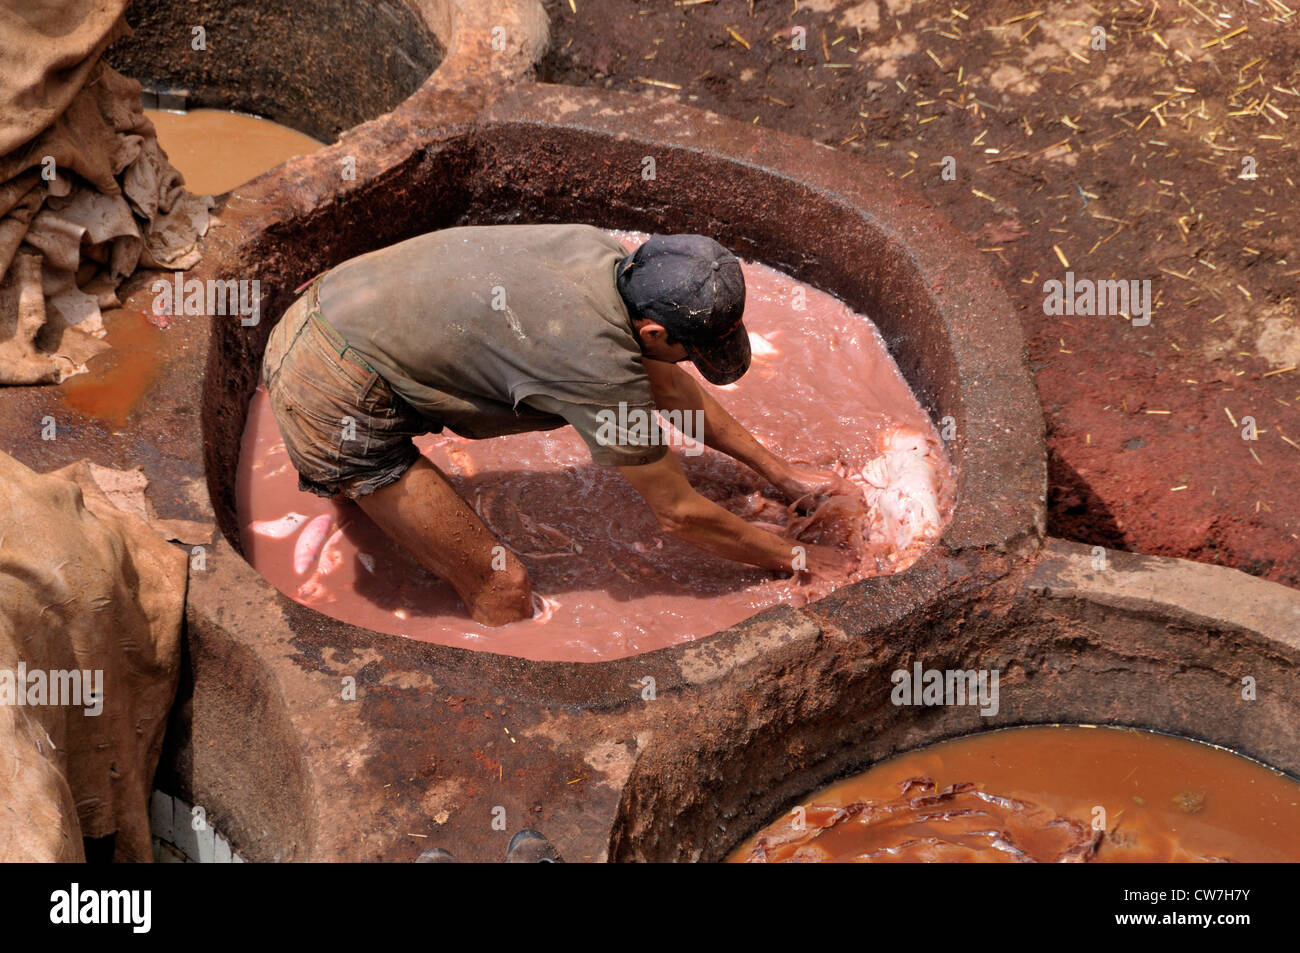 man watering leather in troughs of tanners' and dyers' quarter chouwara, Morocco, Fes Stock Photo